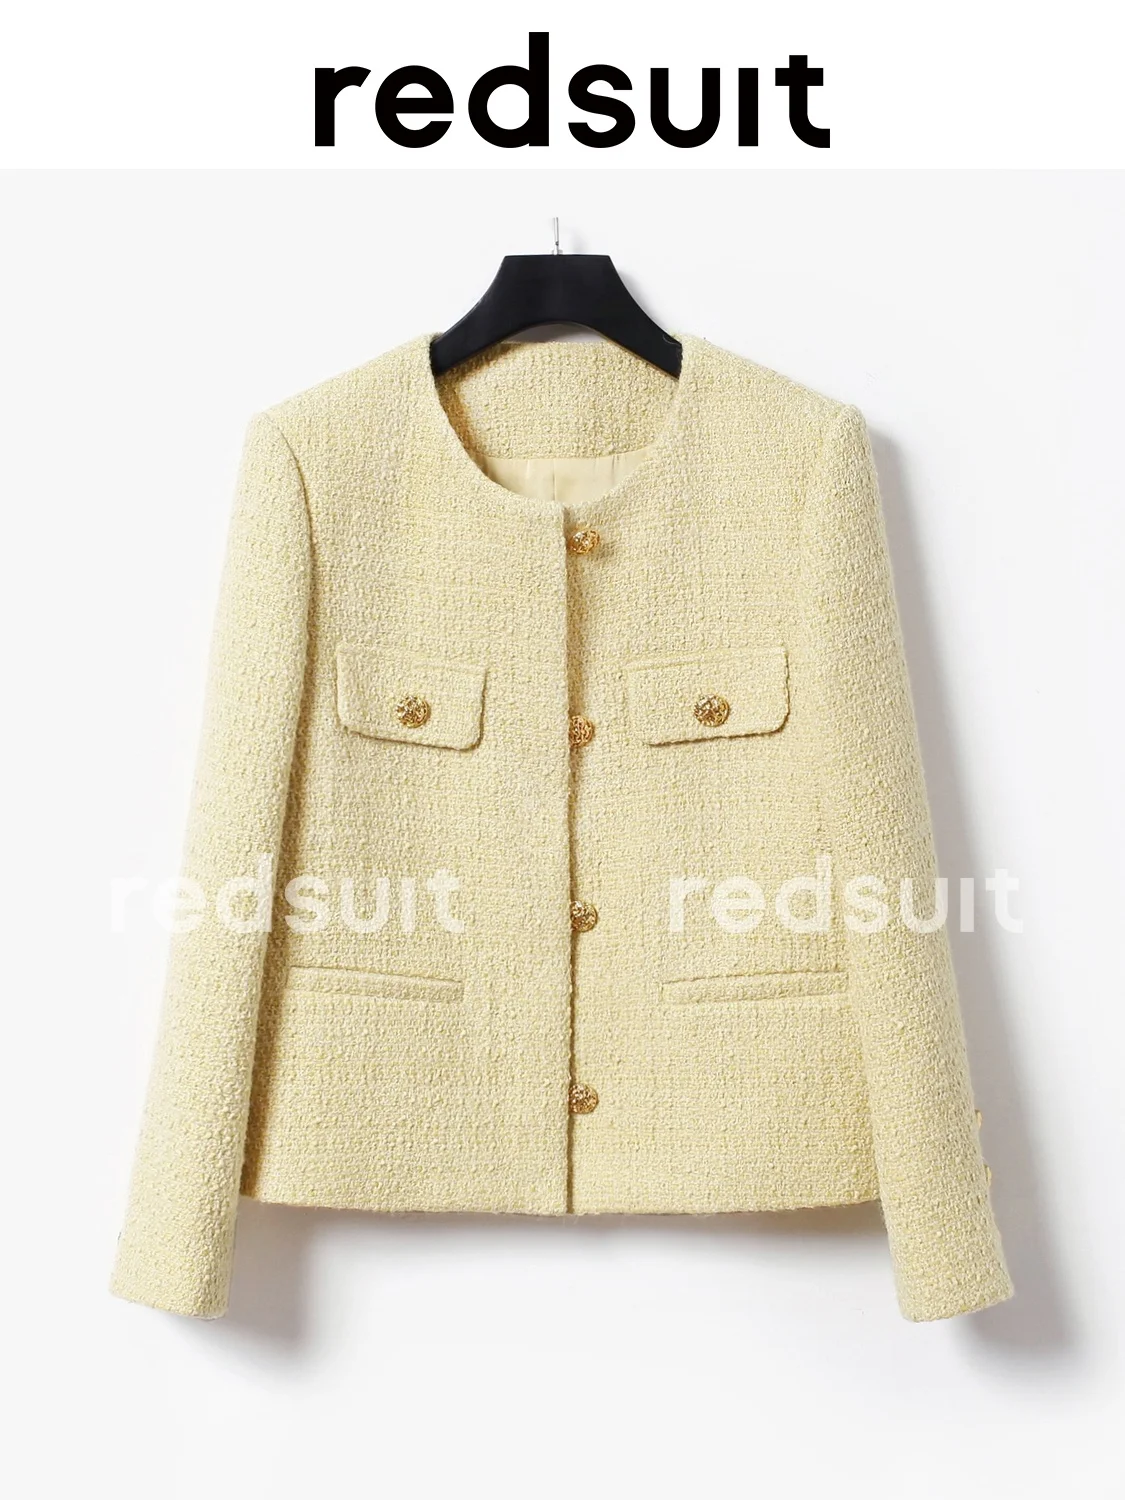 Fresh Tweed Braided Small Fragrance Coat Round Neck Metal Buckle Stylish Yellow Shirt with Long Sleeves